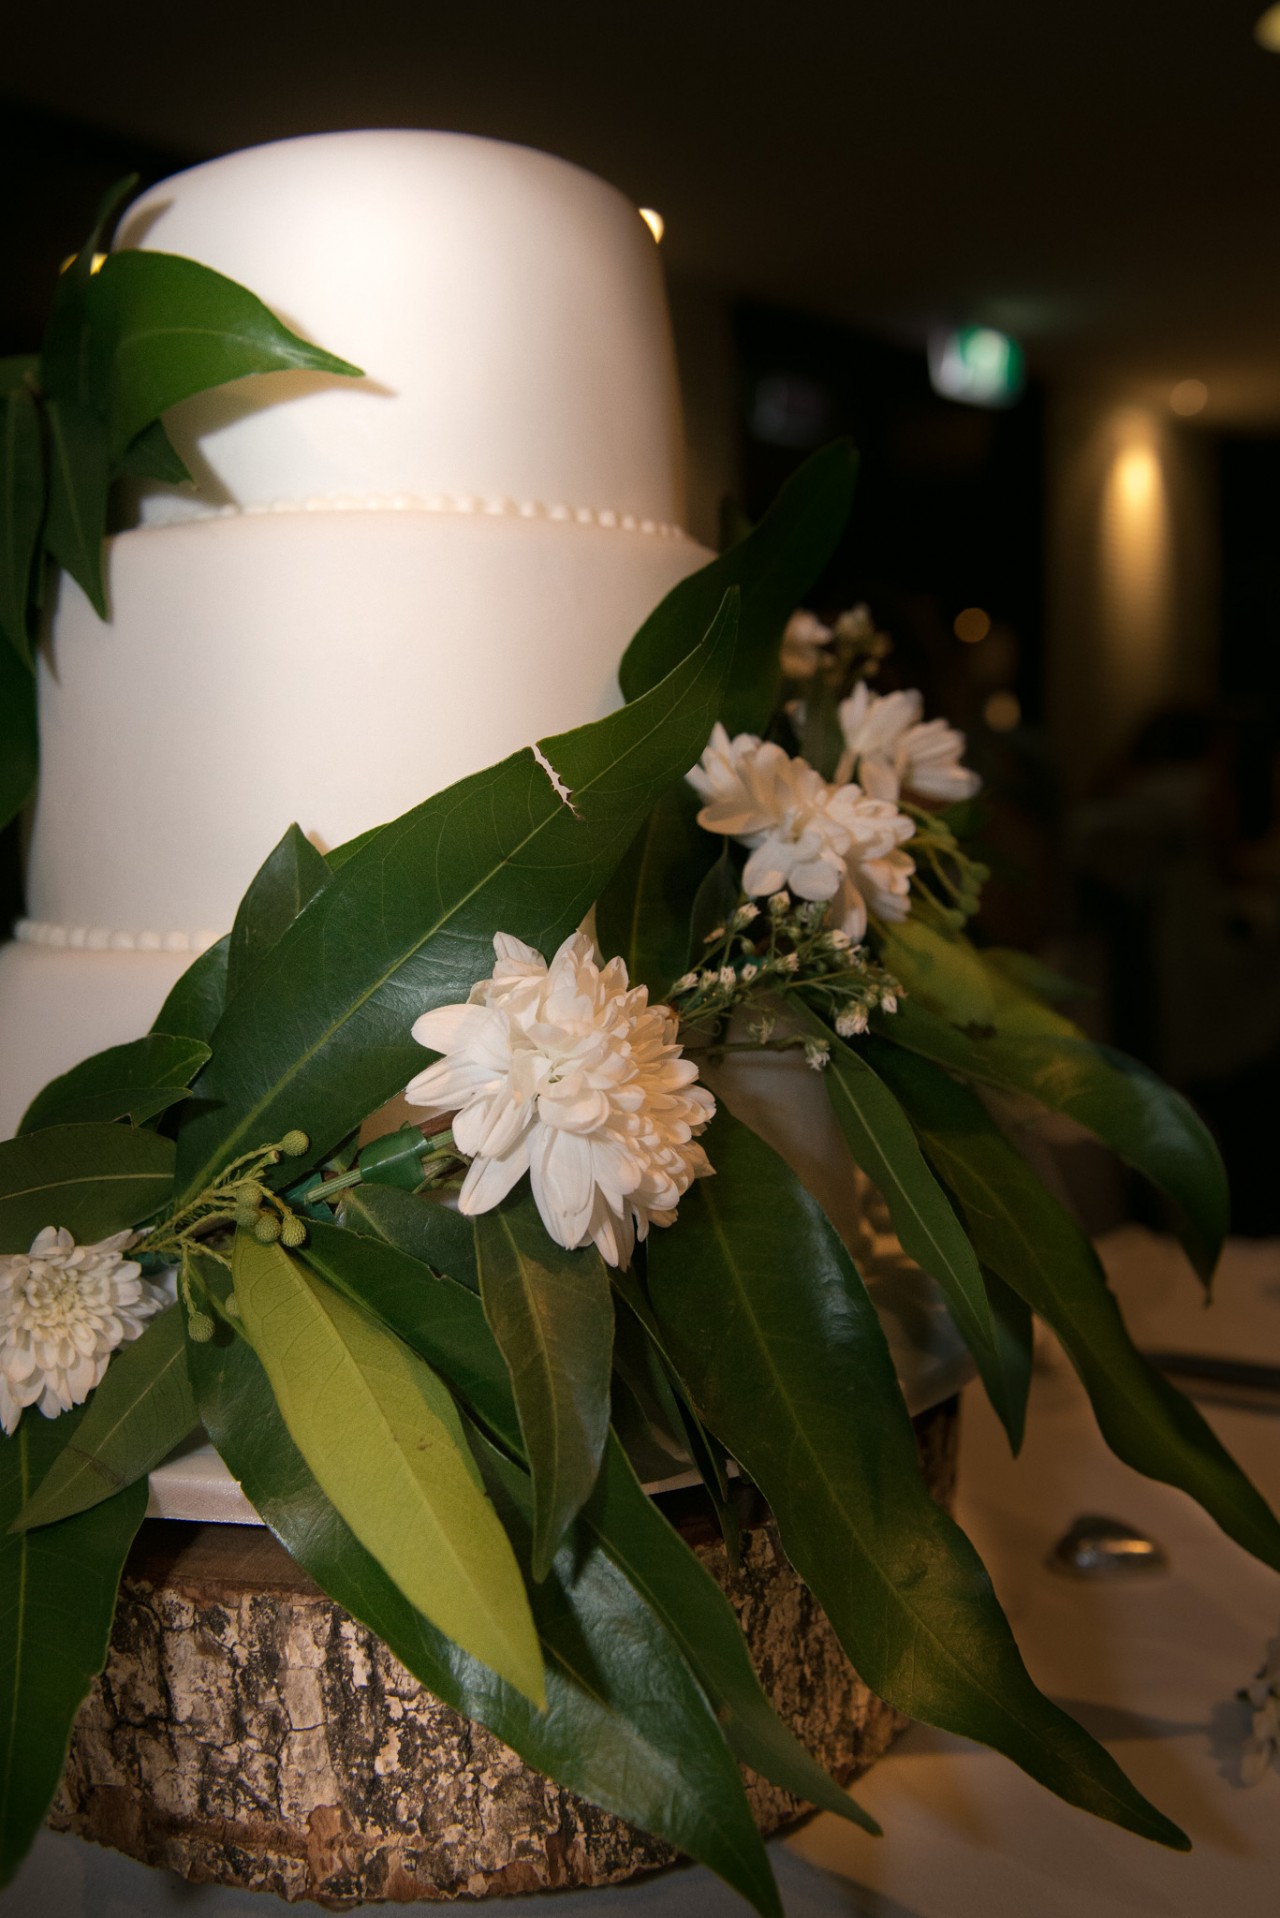 Wedding cake decorated with themed flowers